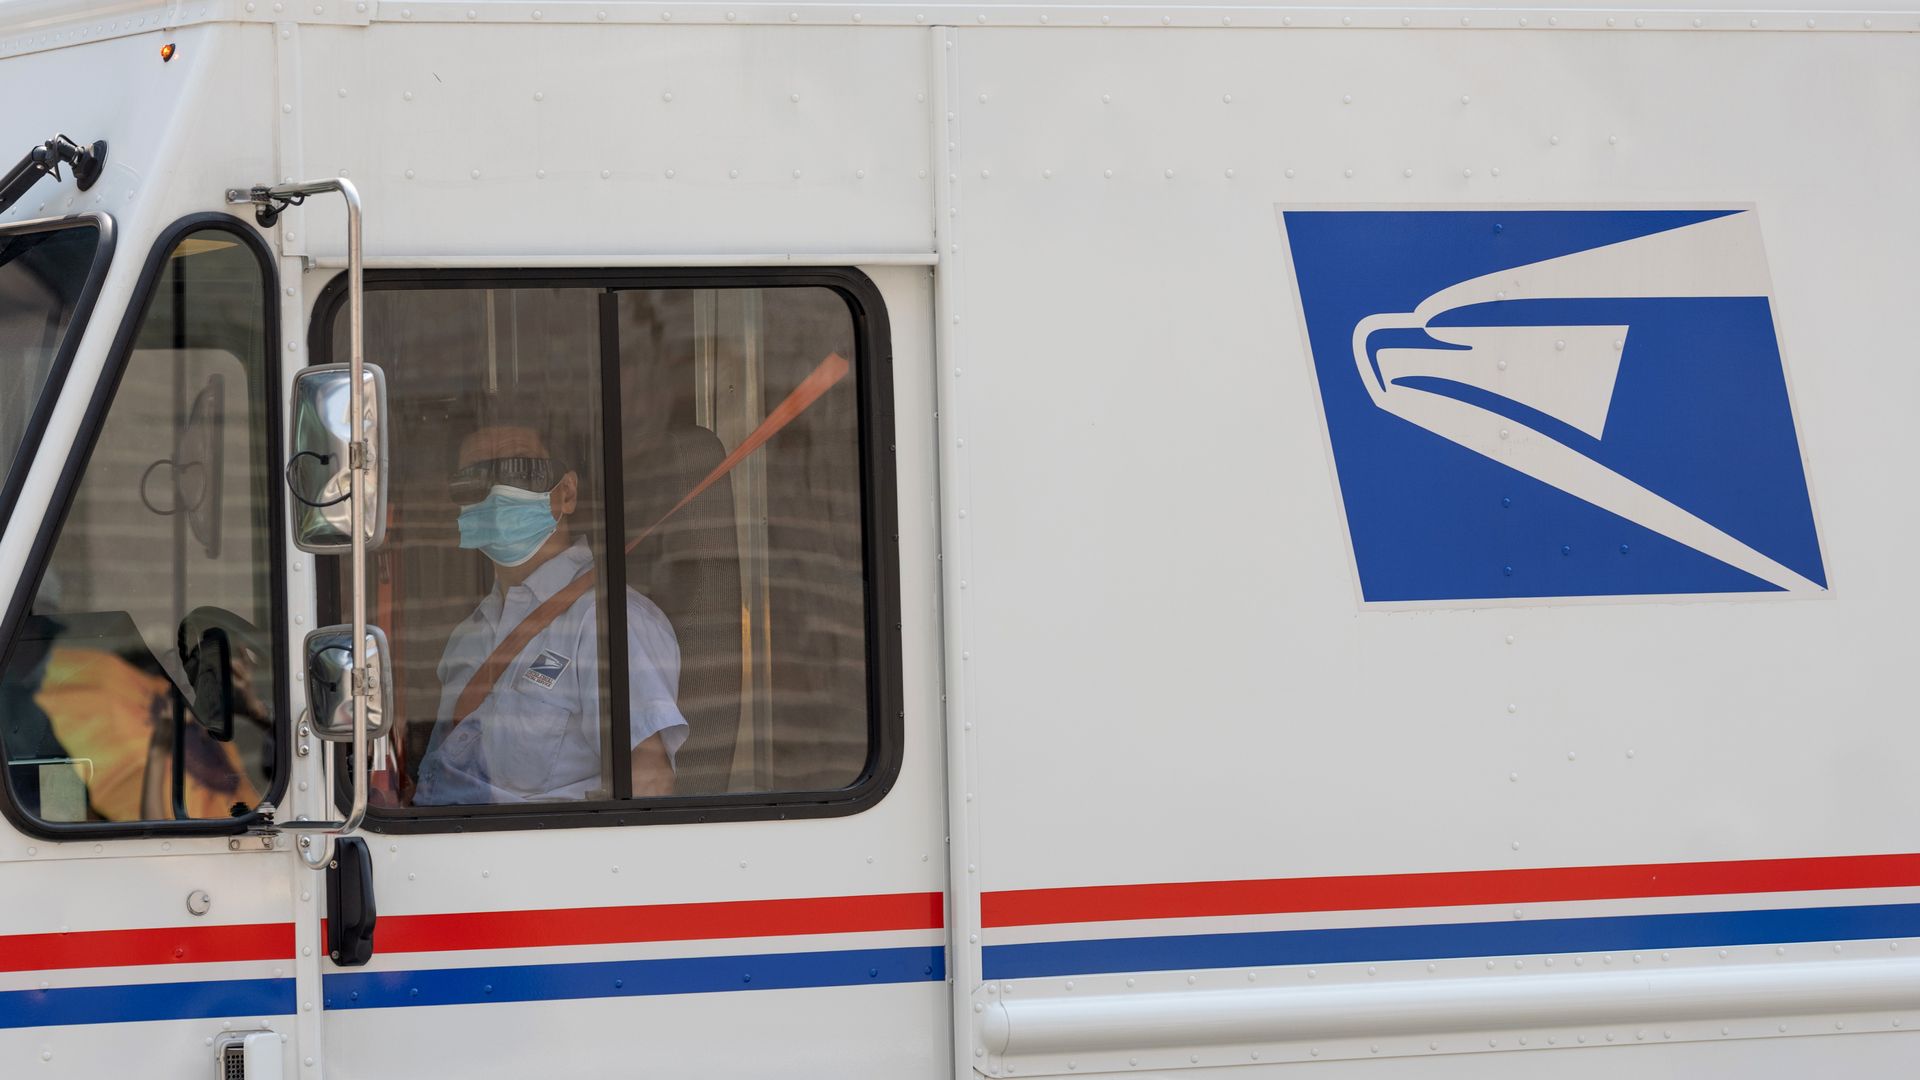 A mail worker wearing a mask looks out the window while driving